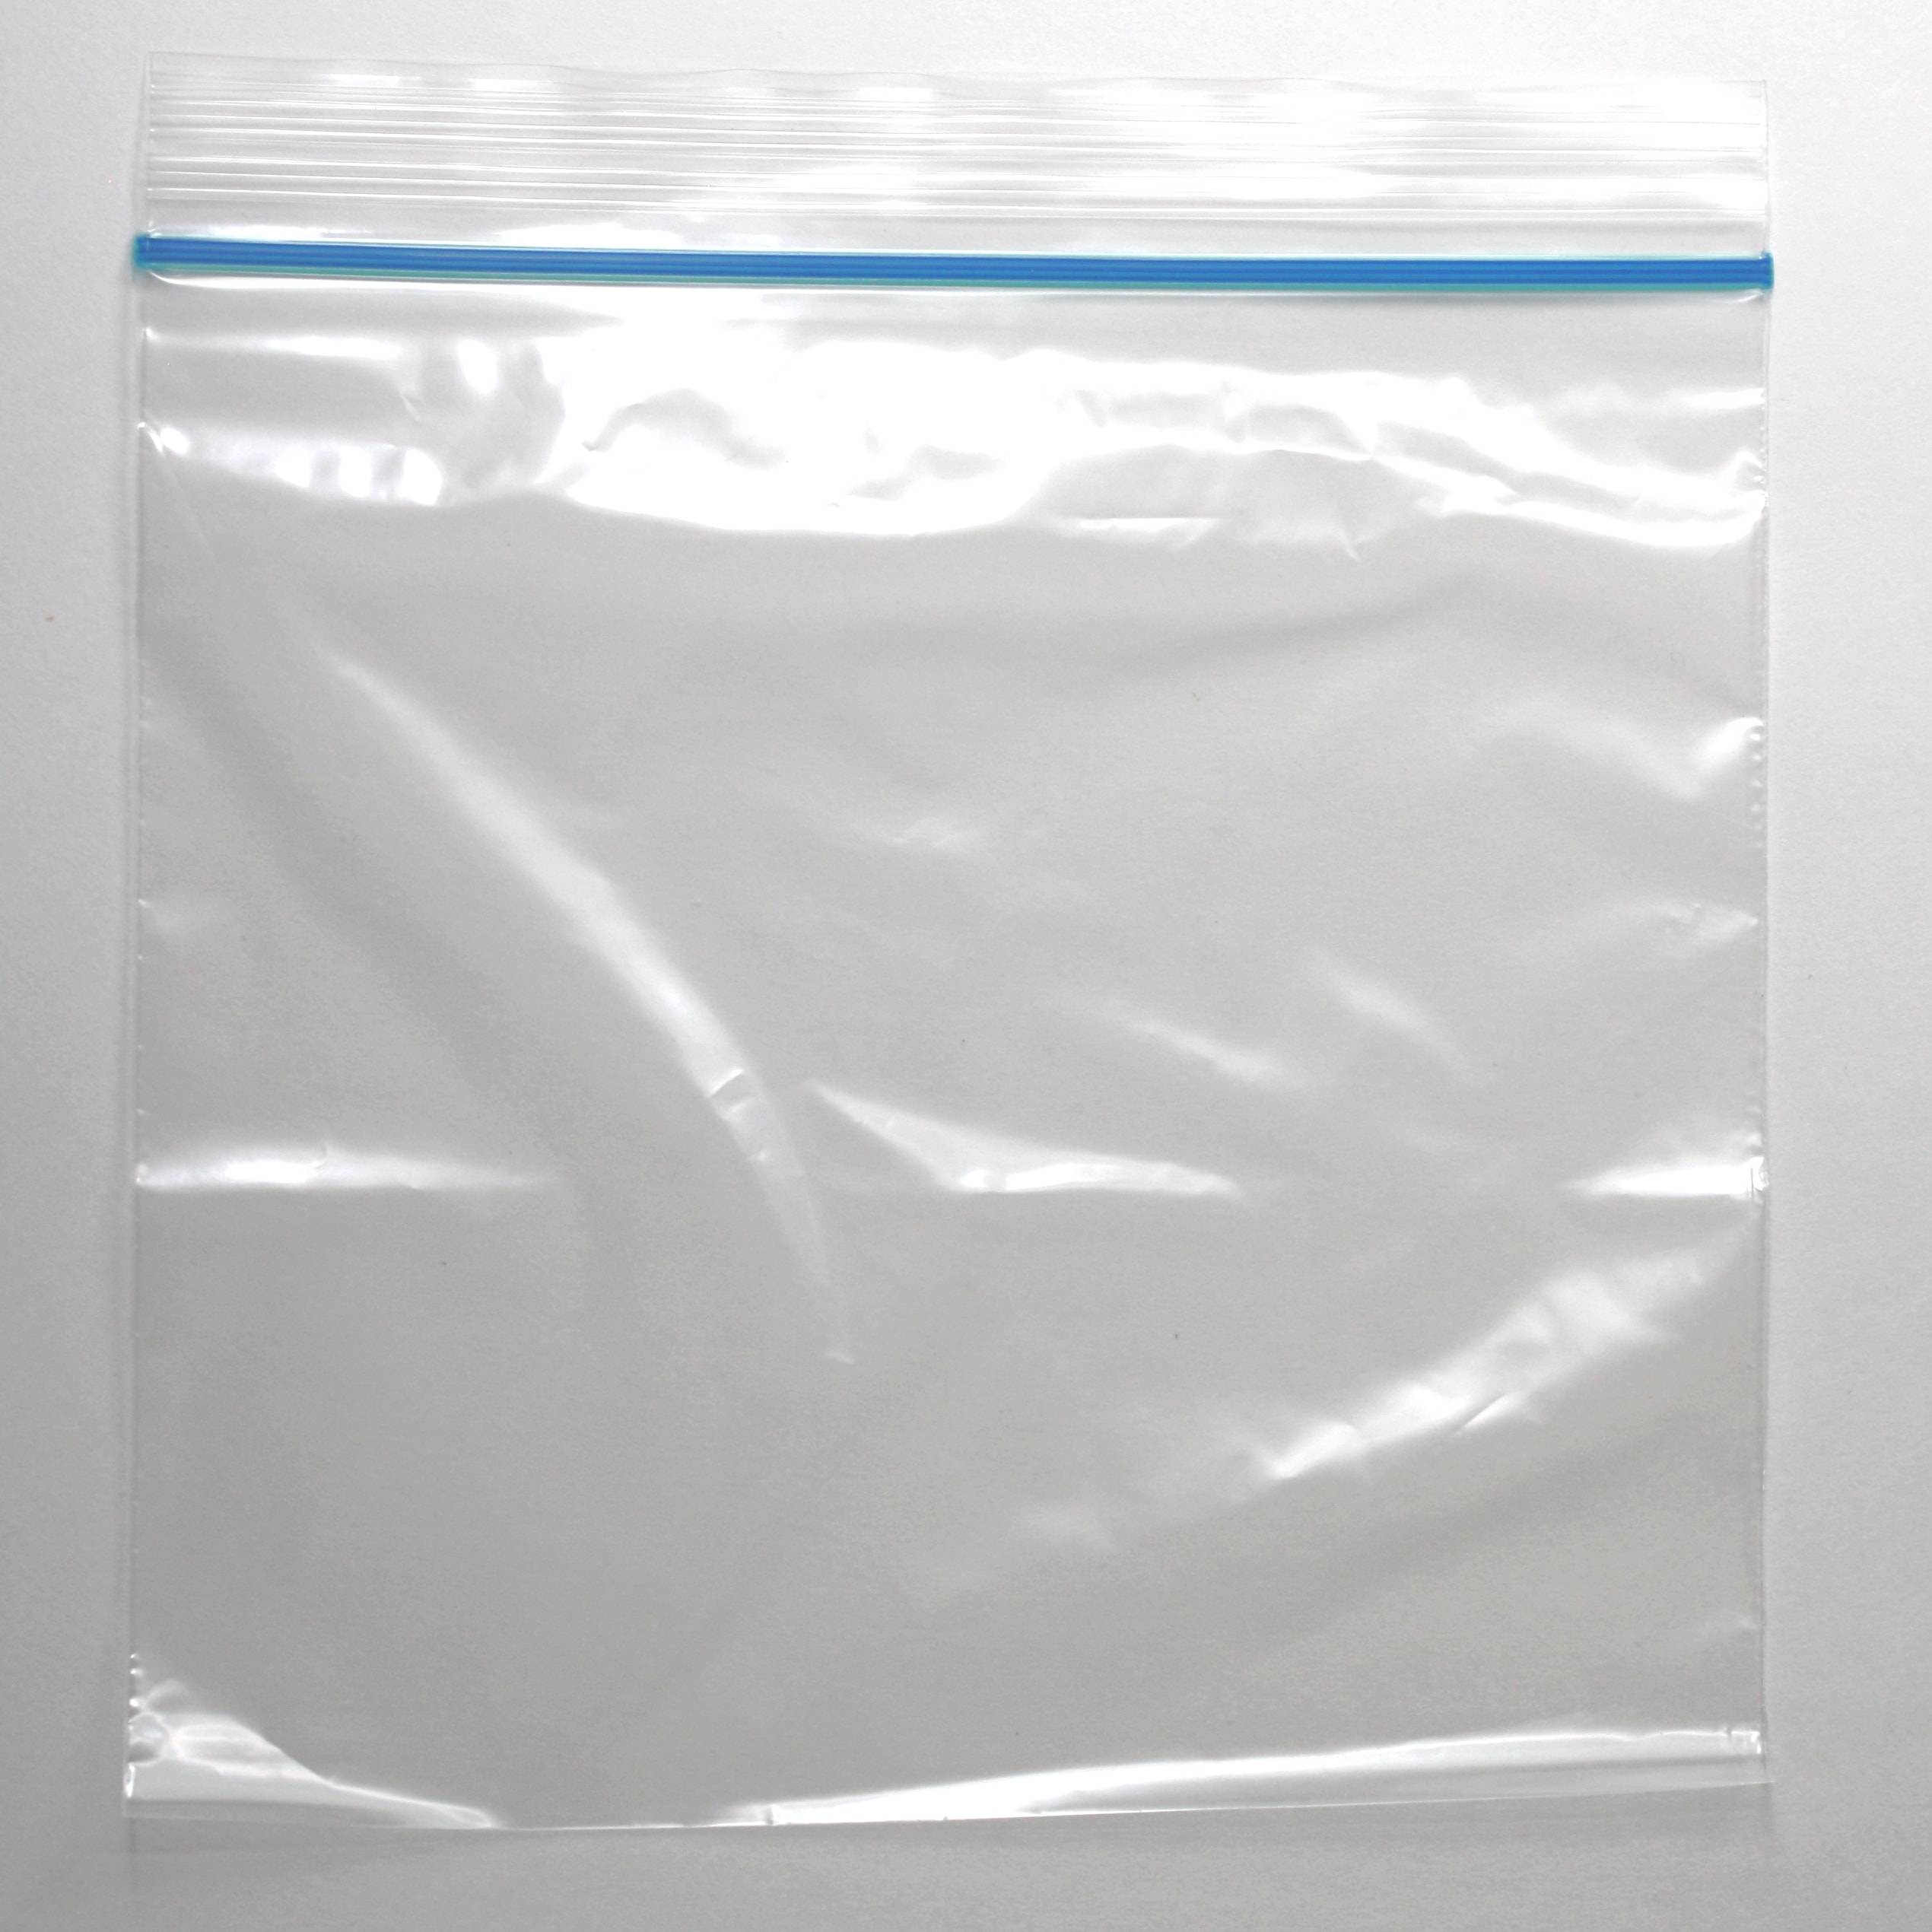 Free picture: plastic, plastic bag, transparent, empty, abstract ...